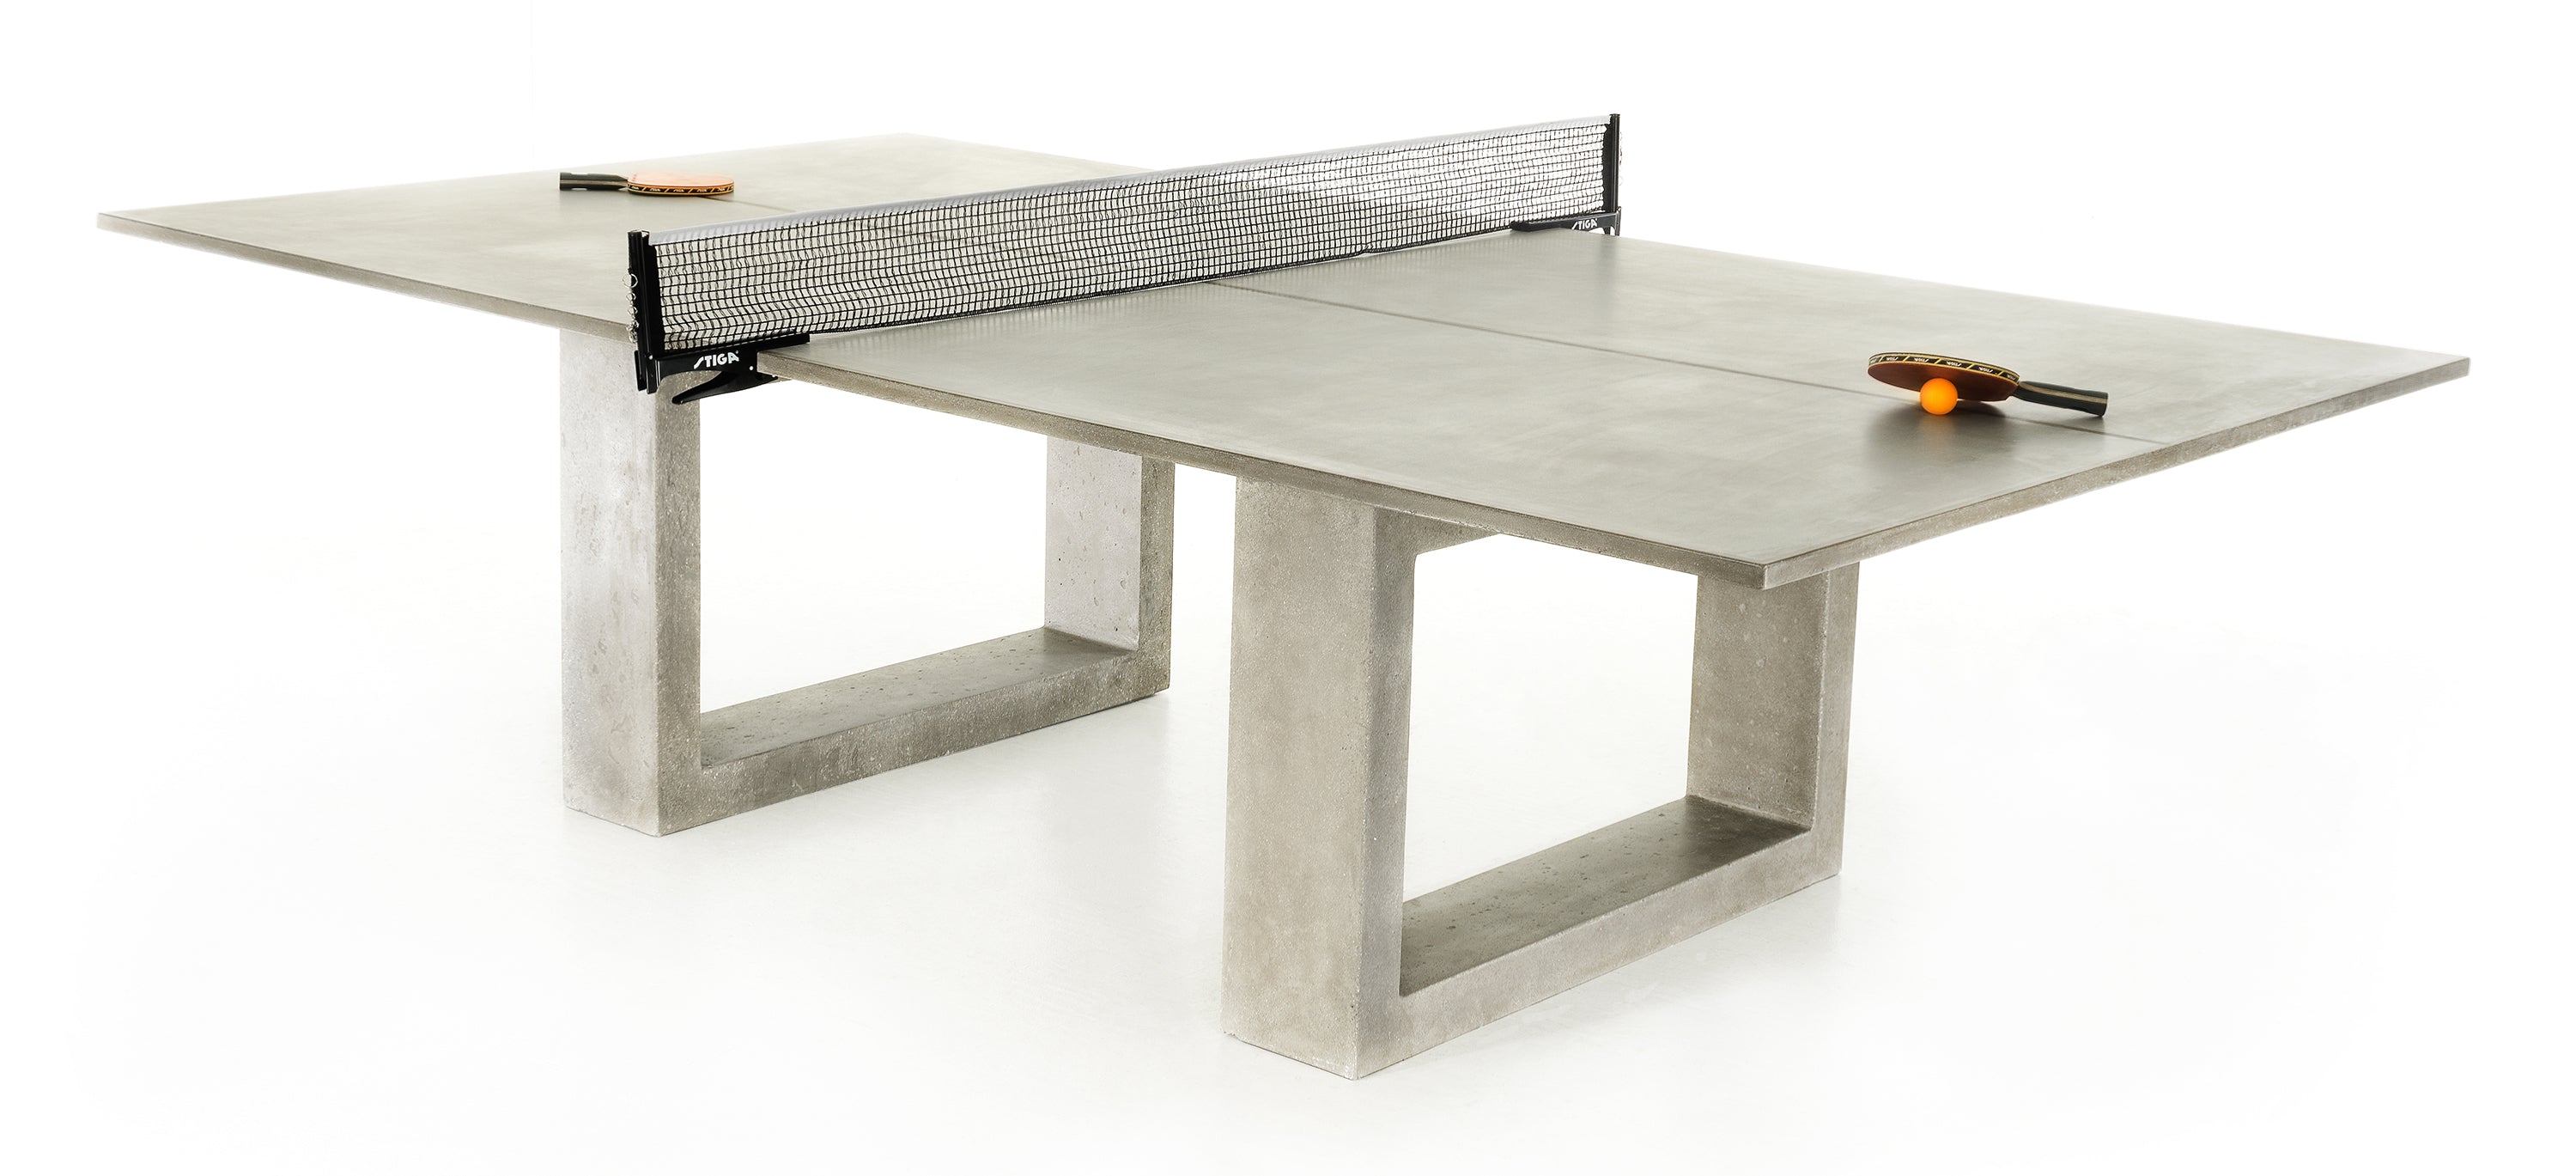 James Concrete Pong & Dining Table - 2Modern